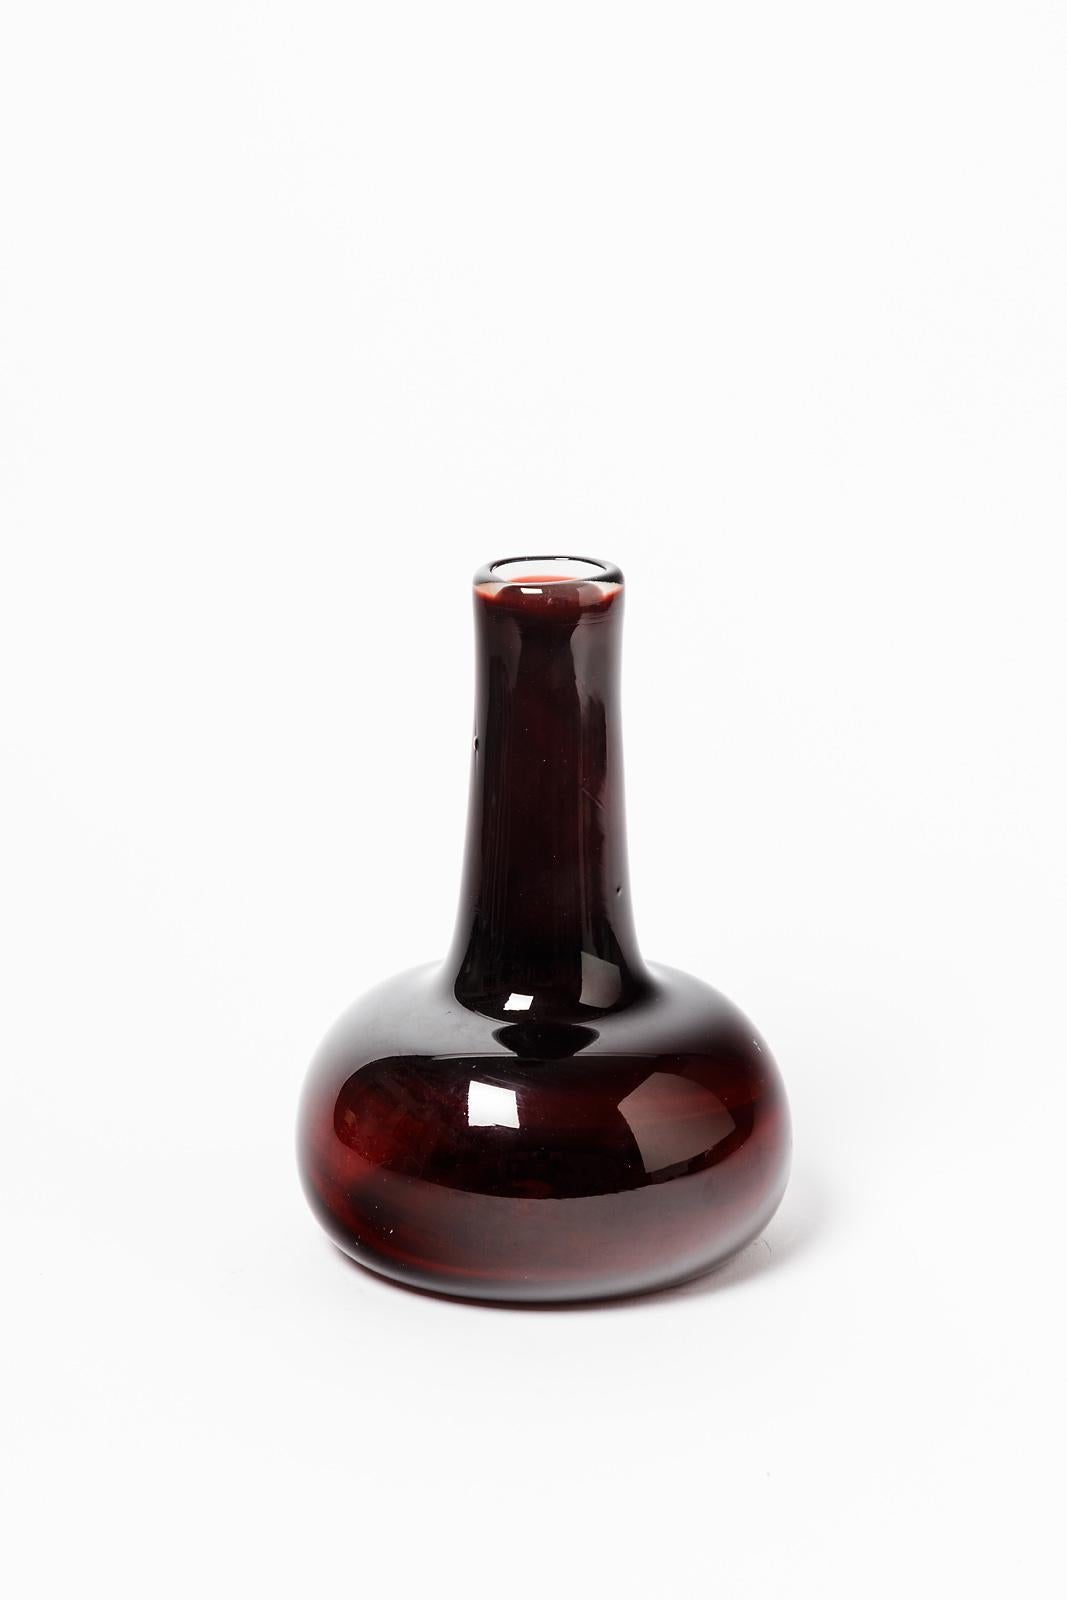 ikea red glass vase